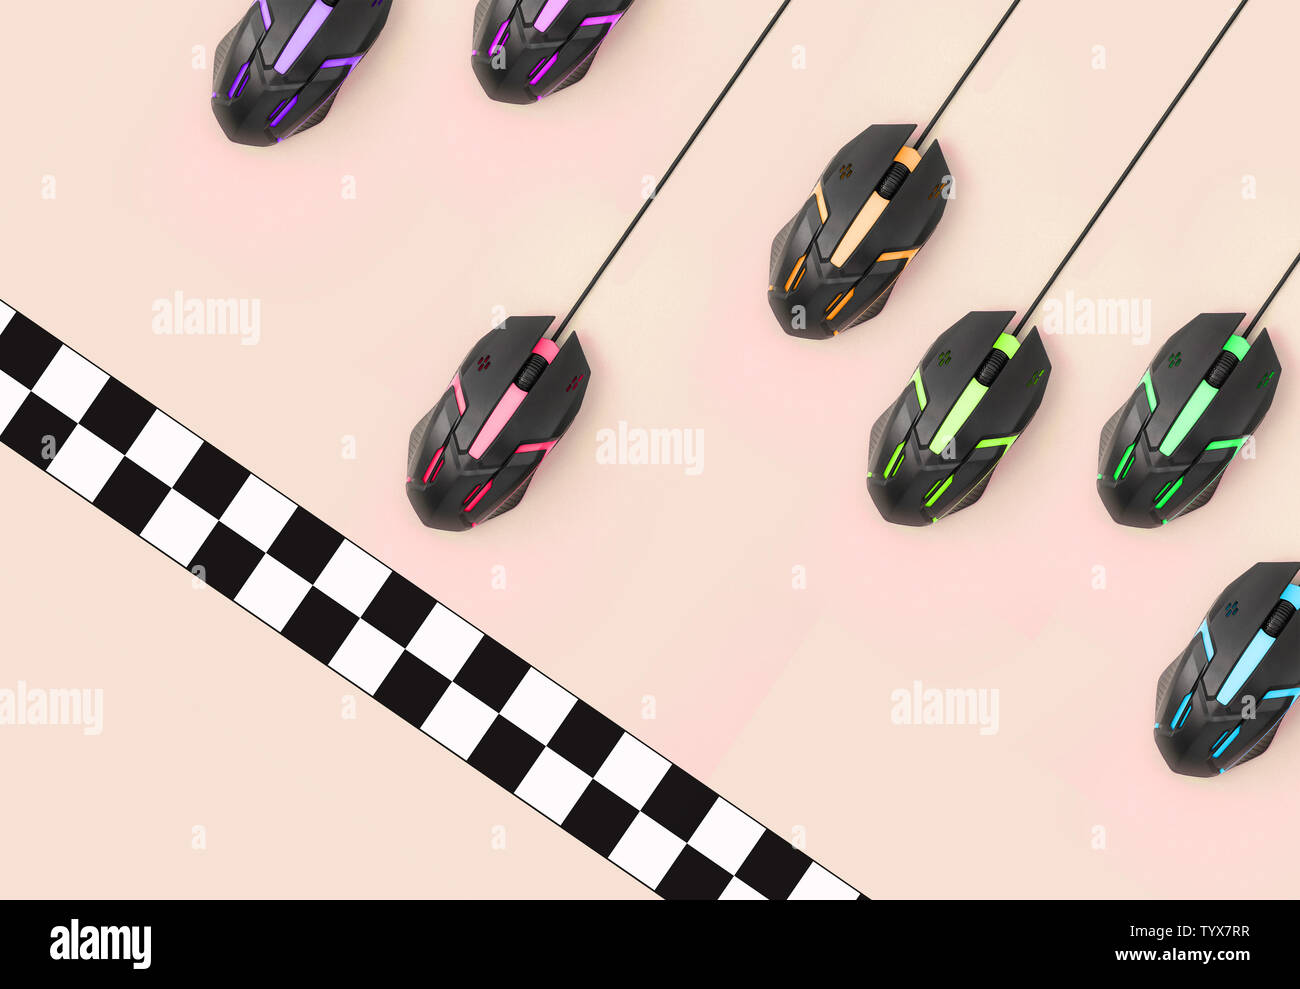 Metaphor of a sports race among computer mouses approaching the checkered finish line. The concept of eSports, high-speed hardware, Internet connectio Stock Photo